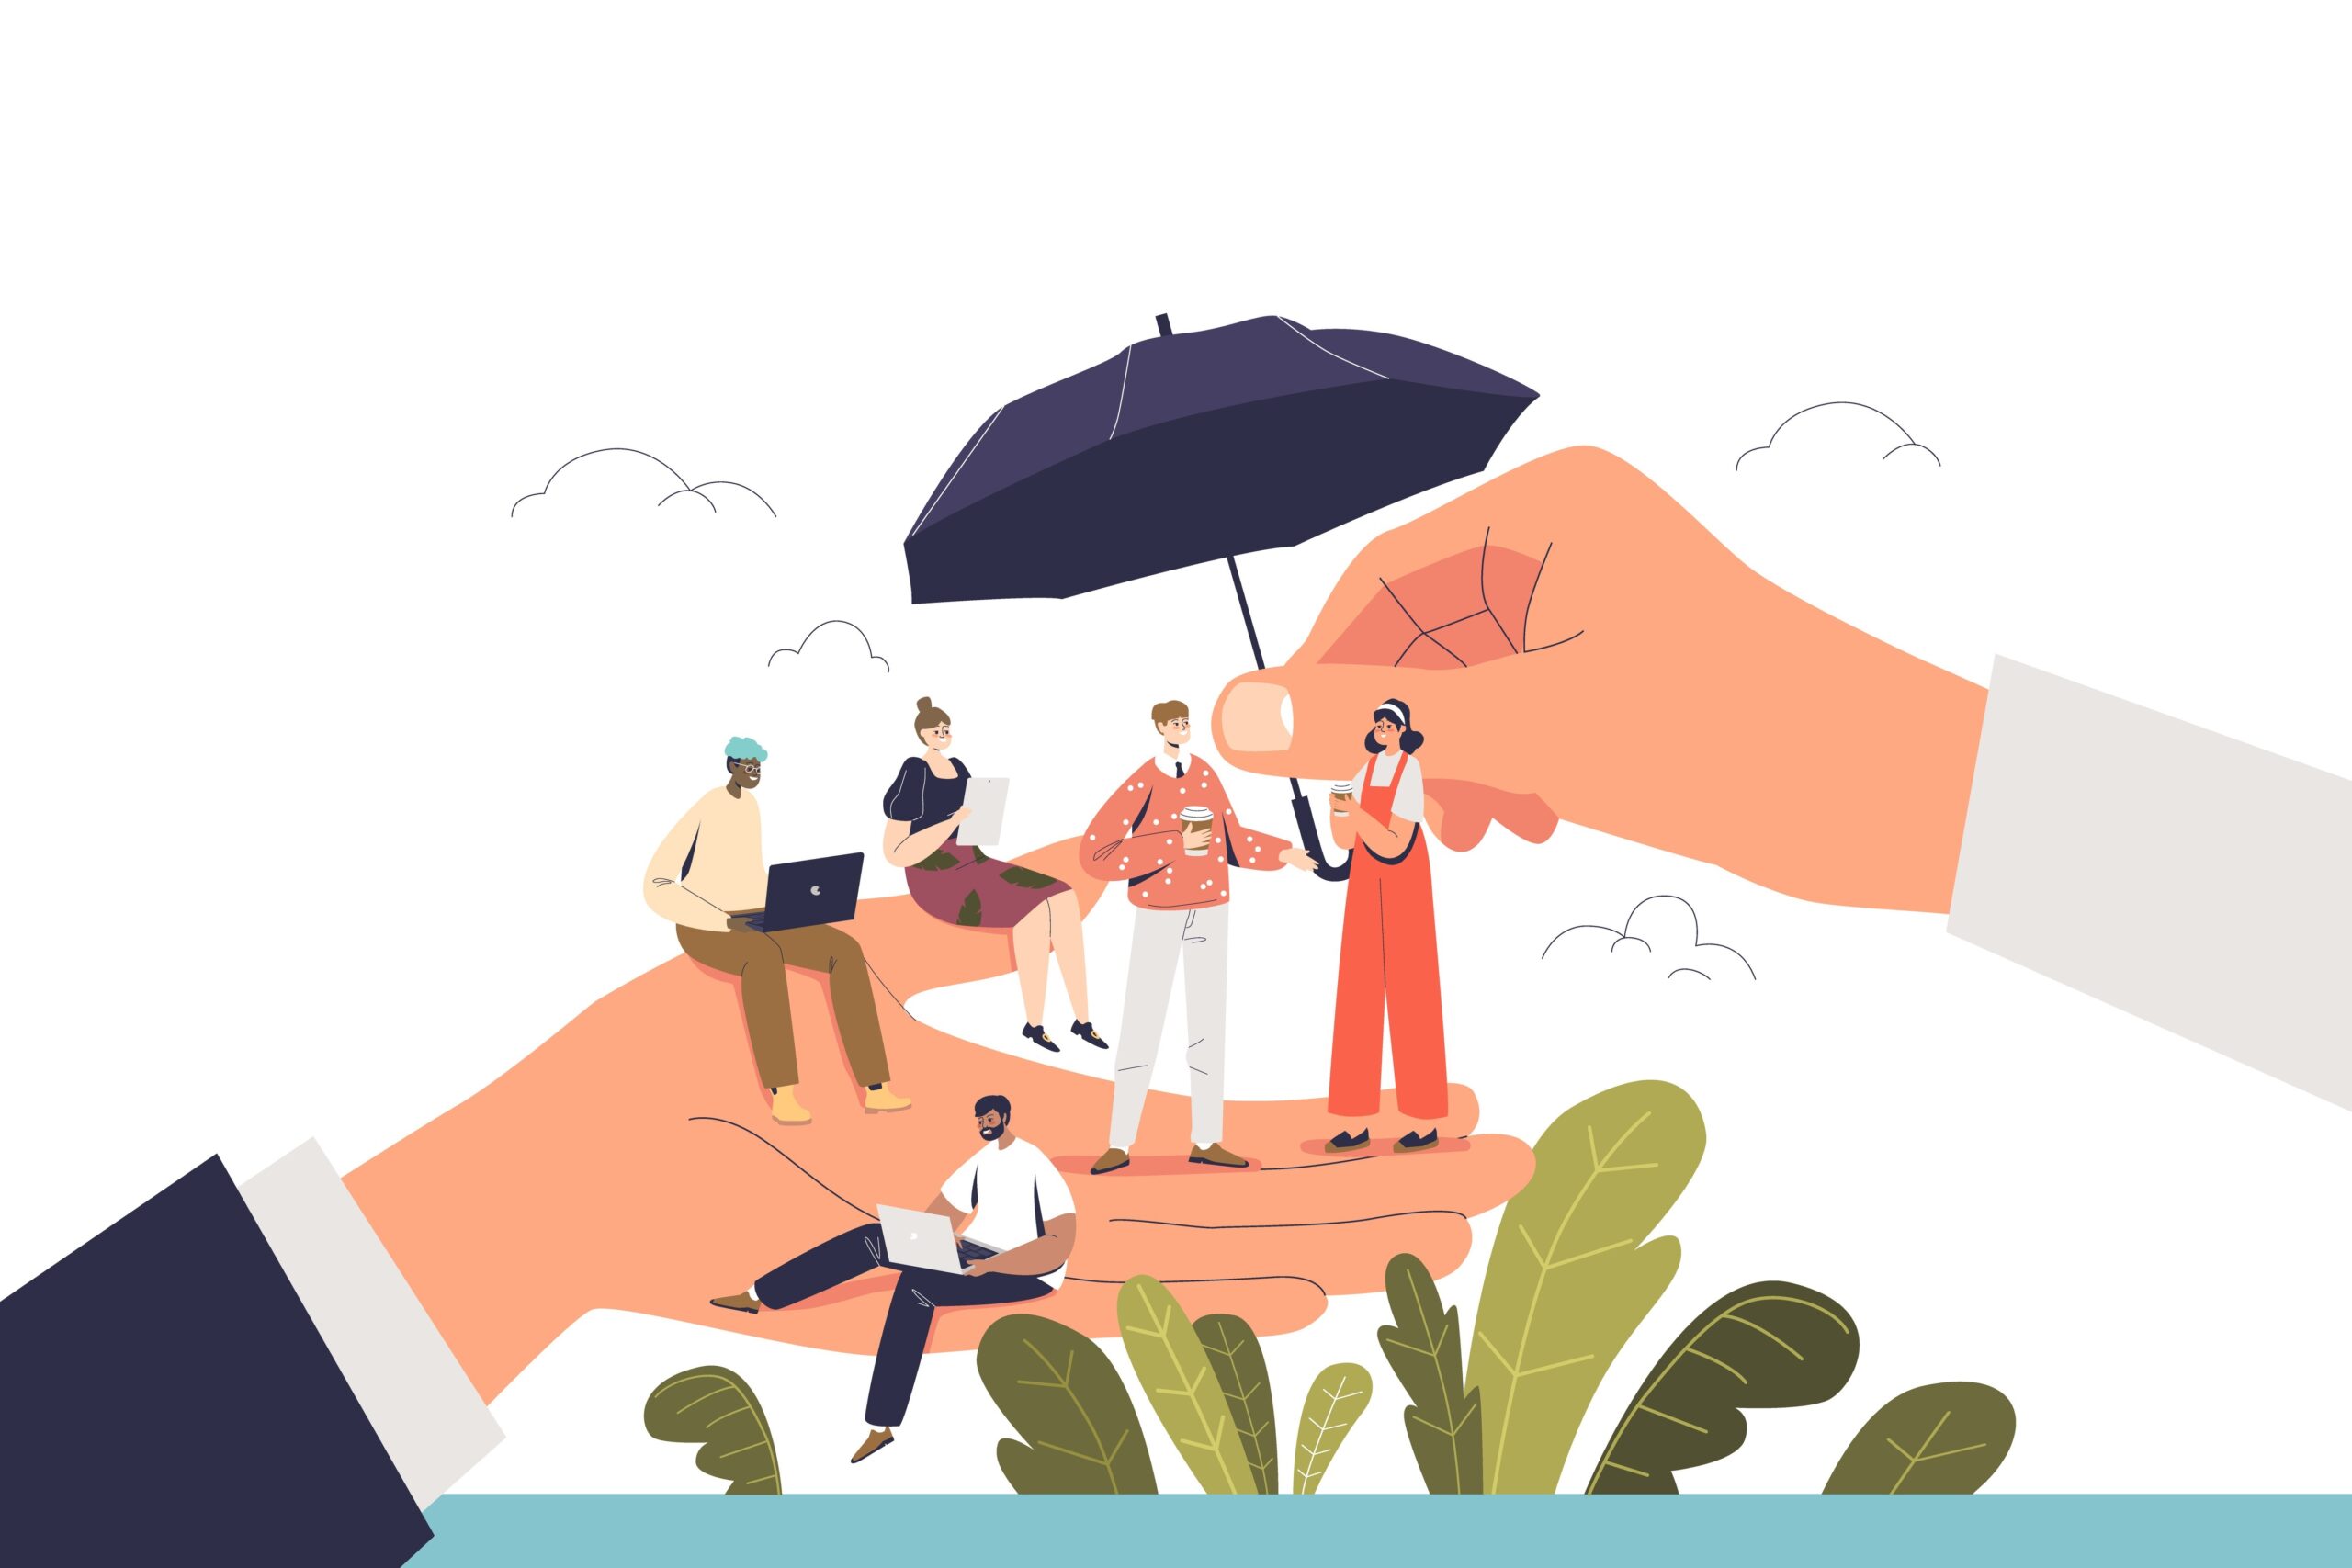 Care for your staff concept of landing page with boss hand holding tiny cartoon office workers. Employee care, wellbeing, good working conditions and protection at workplace. Flat vector illustration